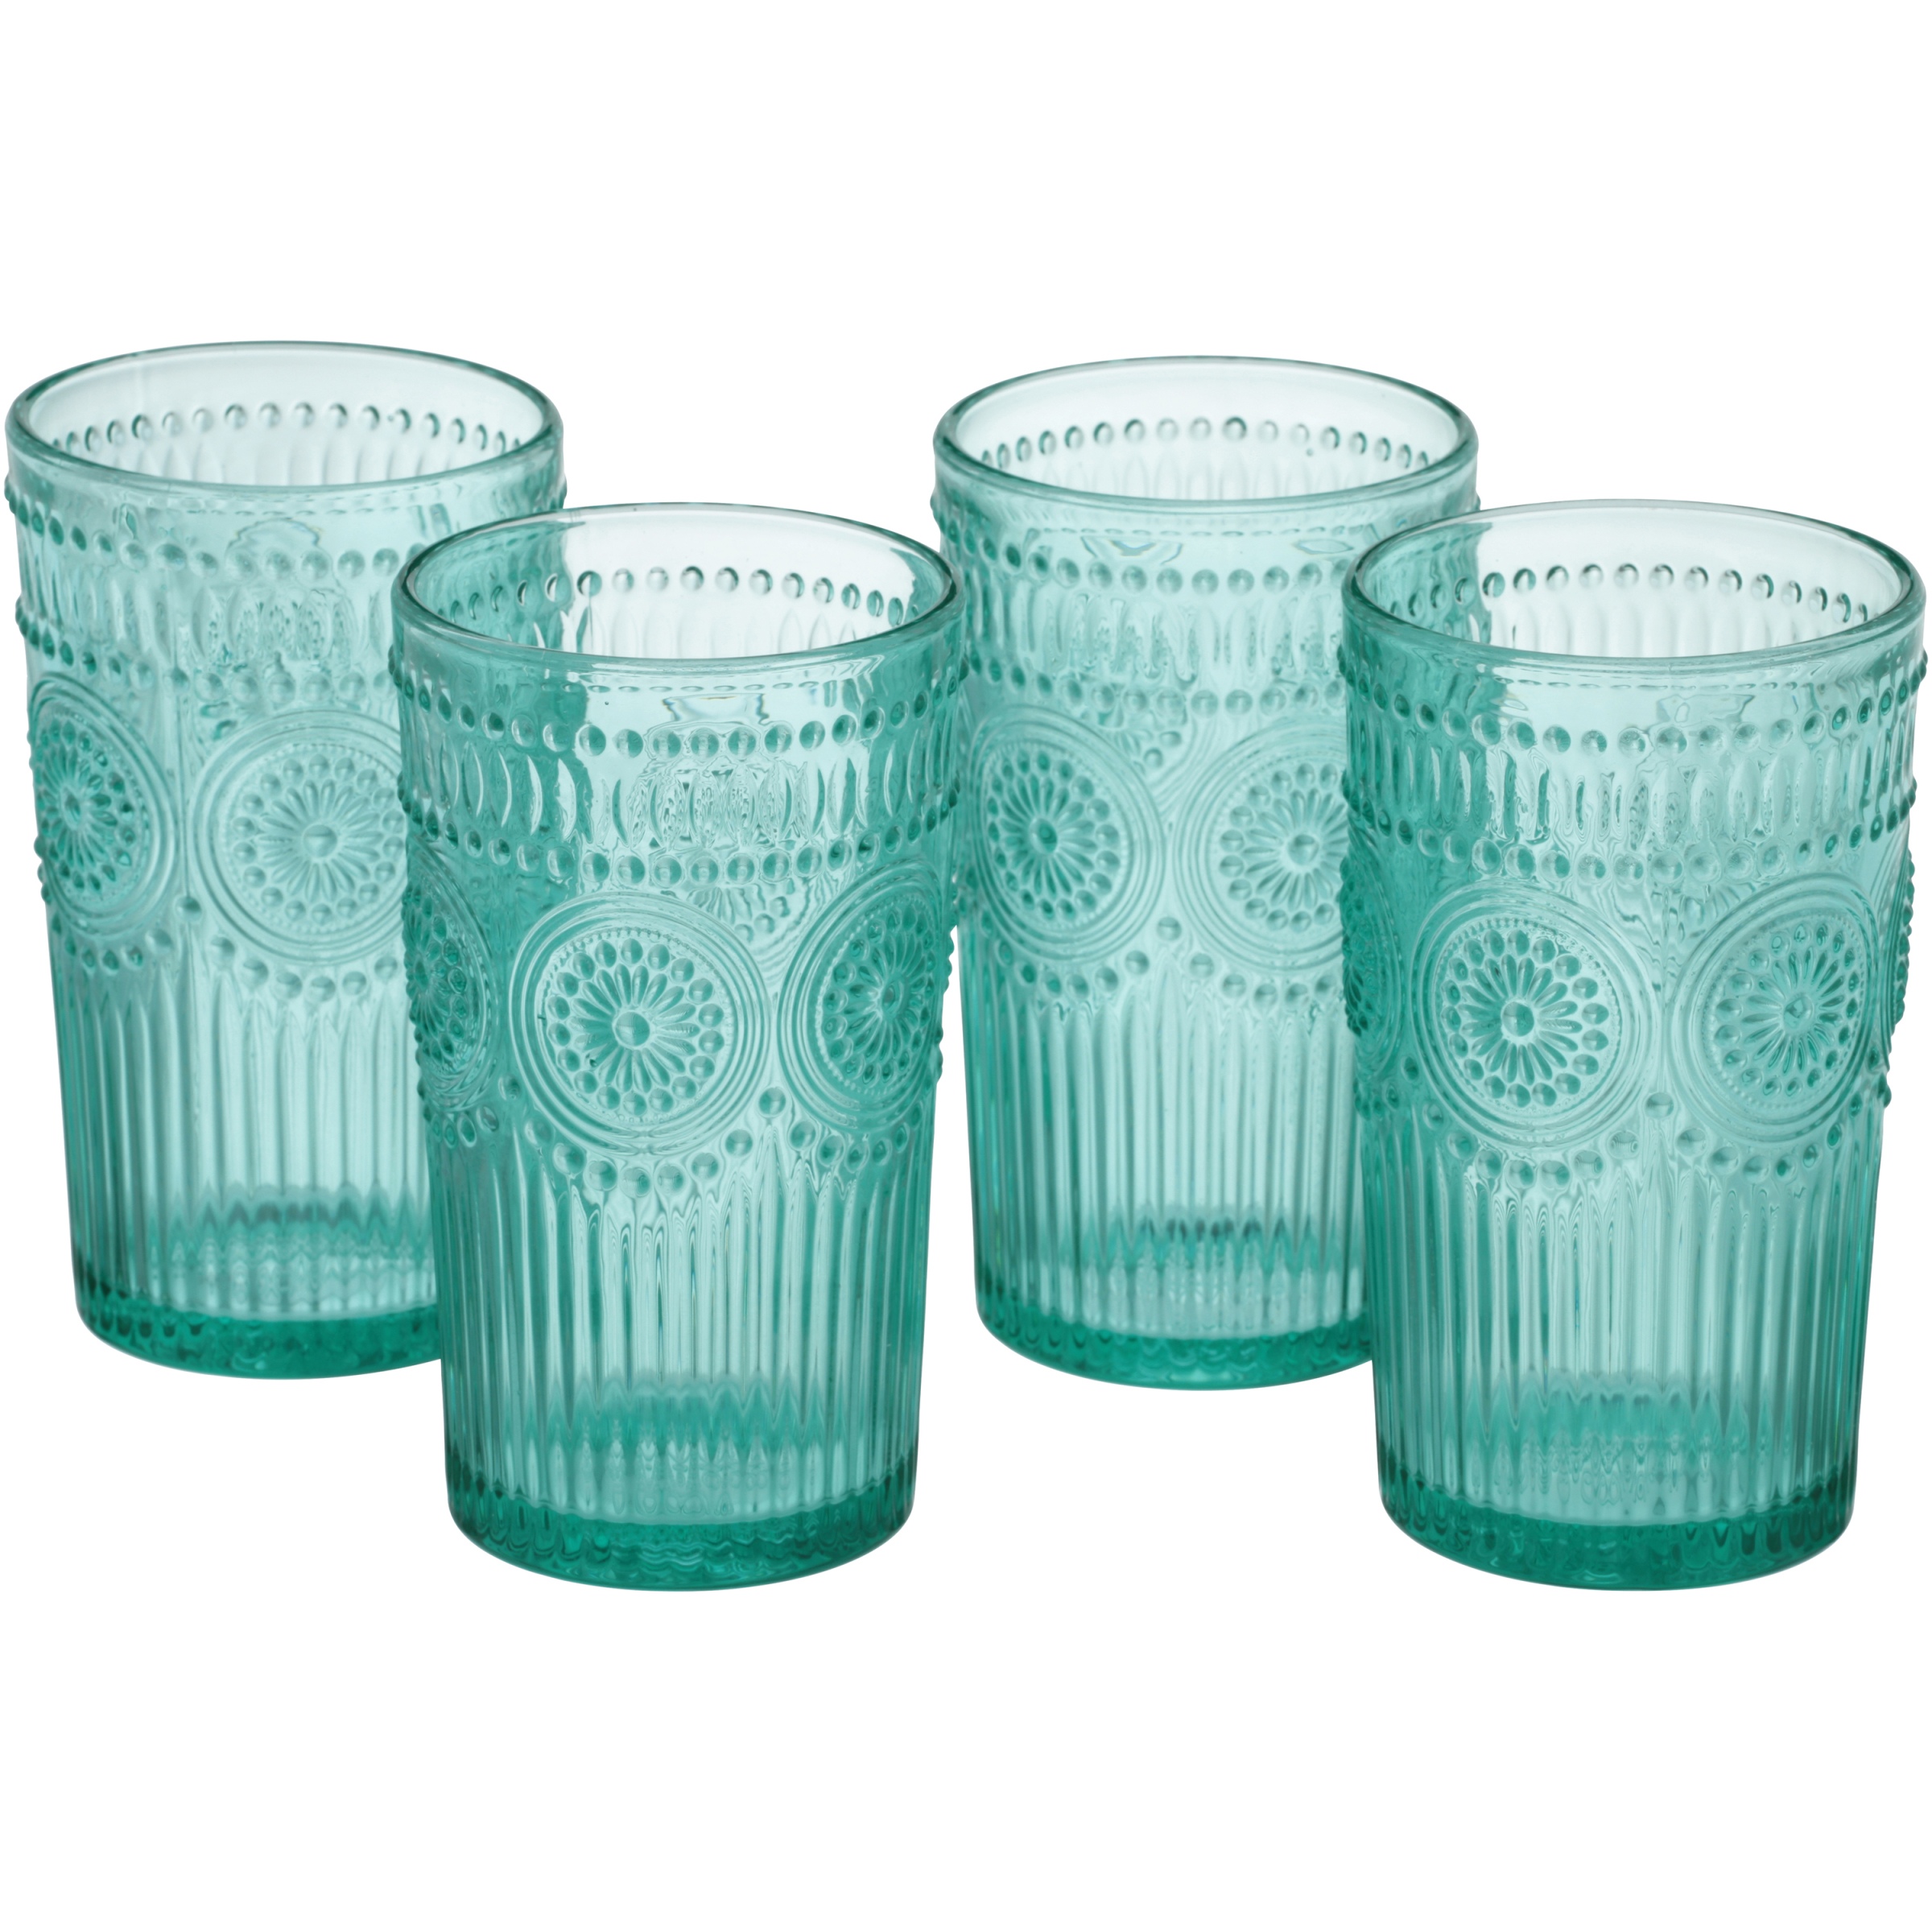 The Pioneer Woman Adeline 16-Ounce Teal Emboss Glass Tumblers, Set of 4 - image 1 of 5